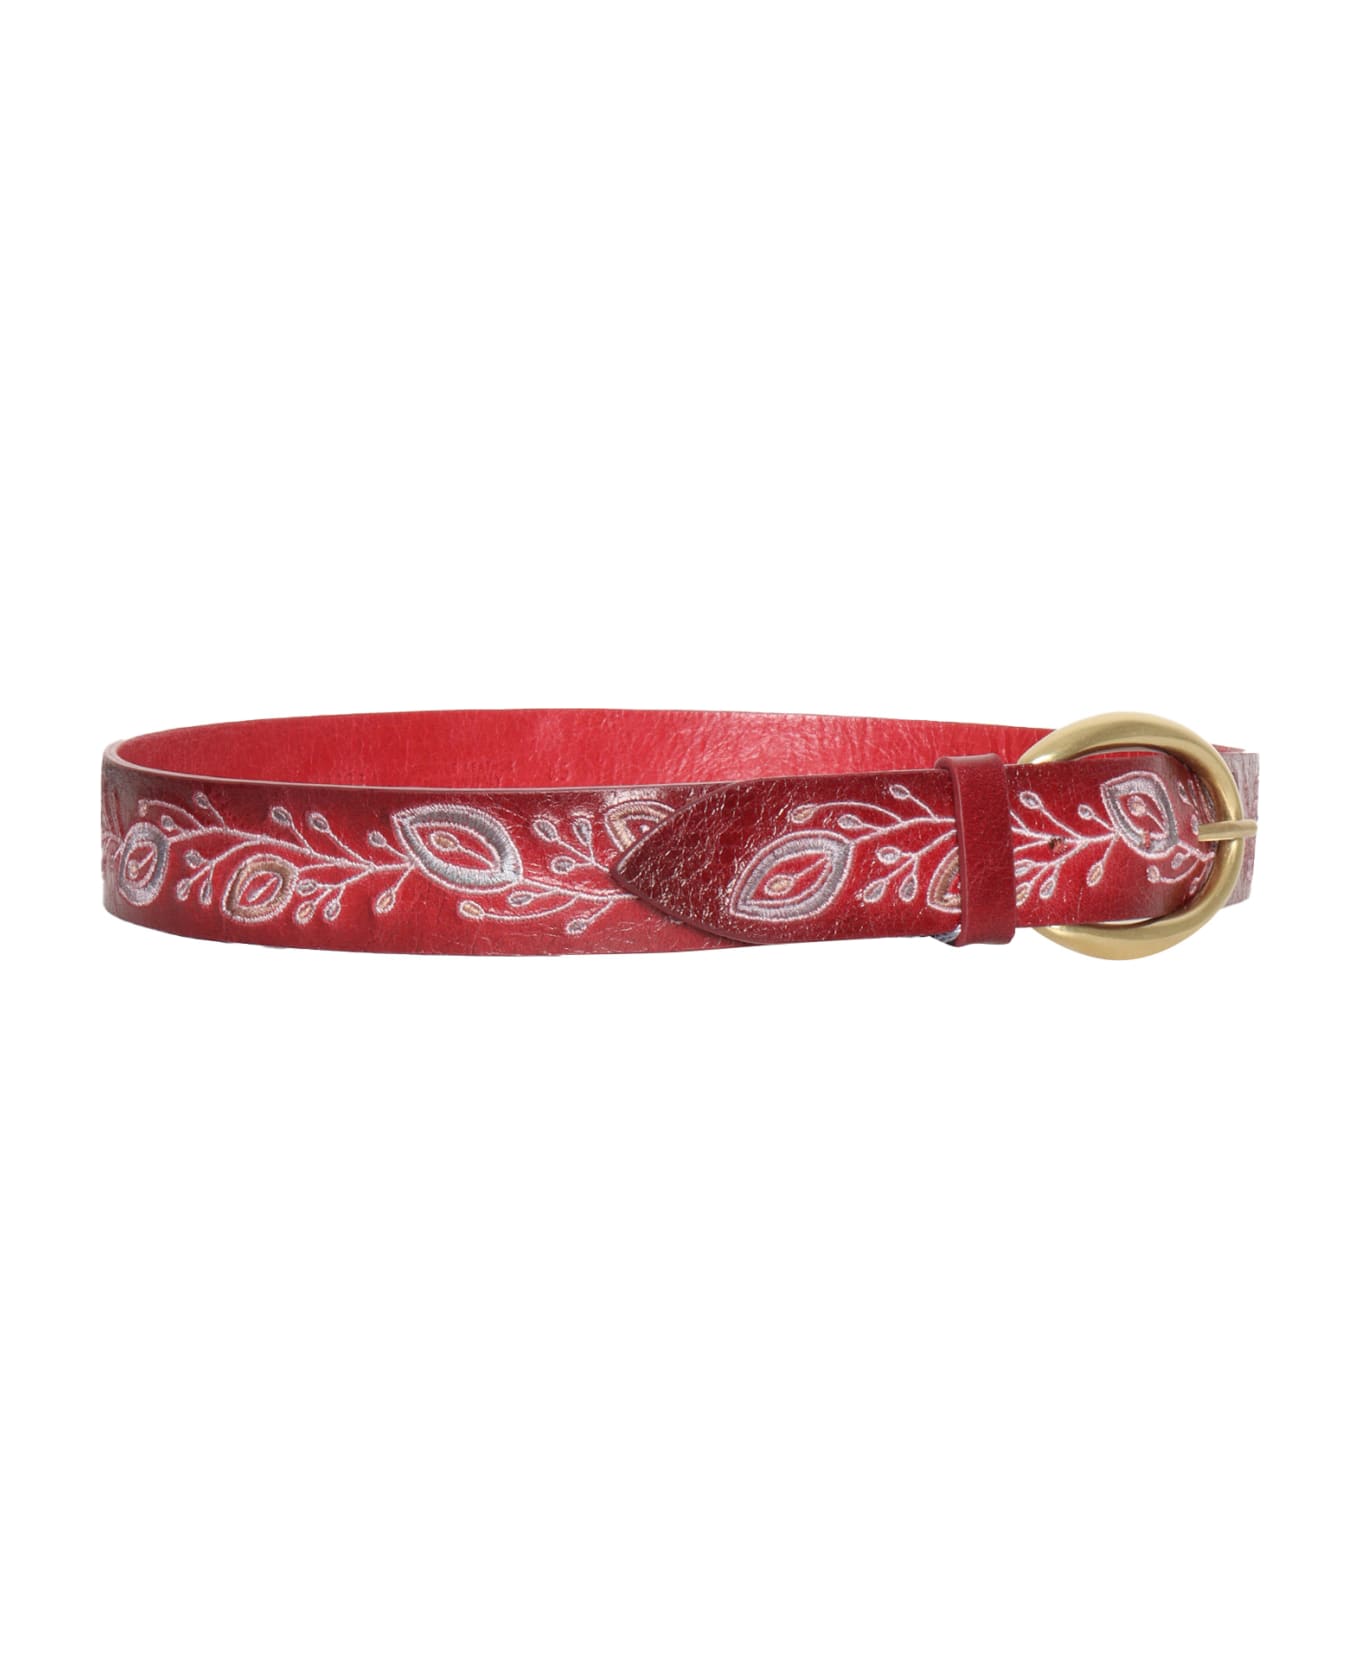 Orciani Red Leather Belt - RED